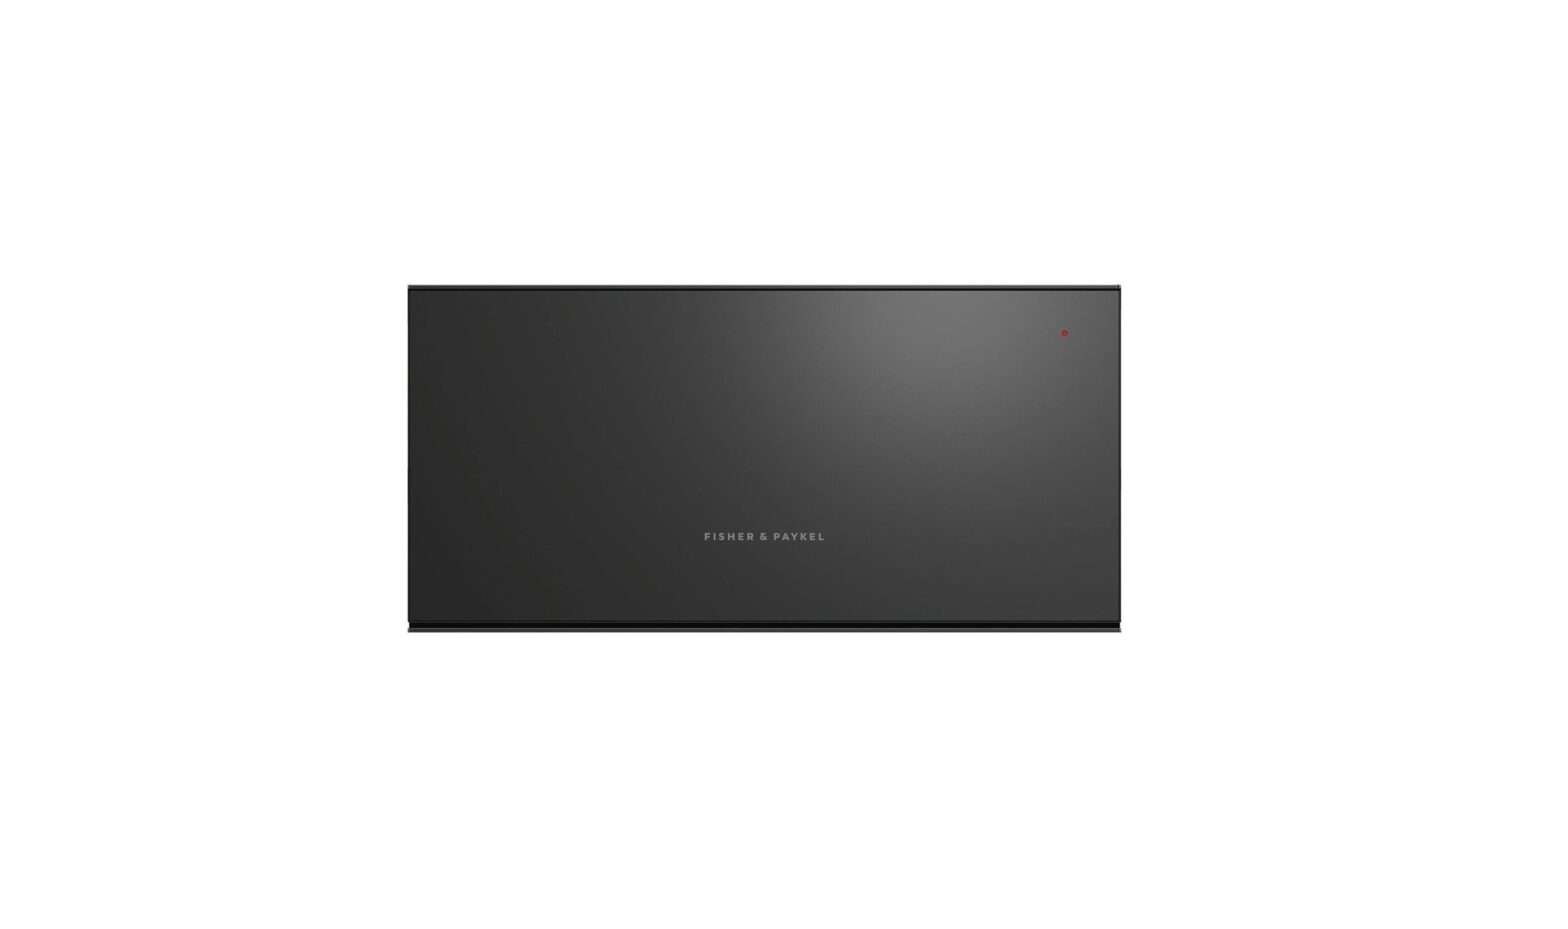 FISHER PAYKEL WB76SPEX1 76cm Warming Drawer User Guide - Featured image